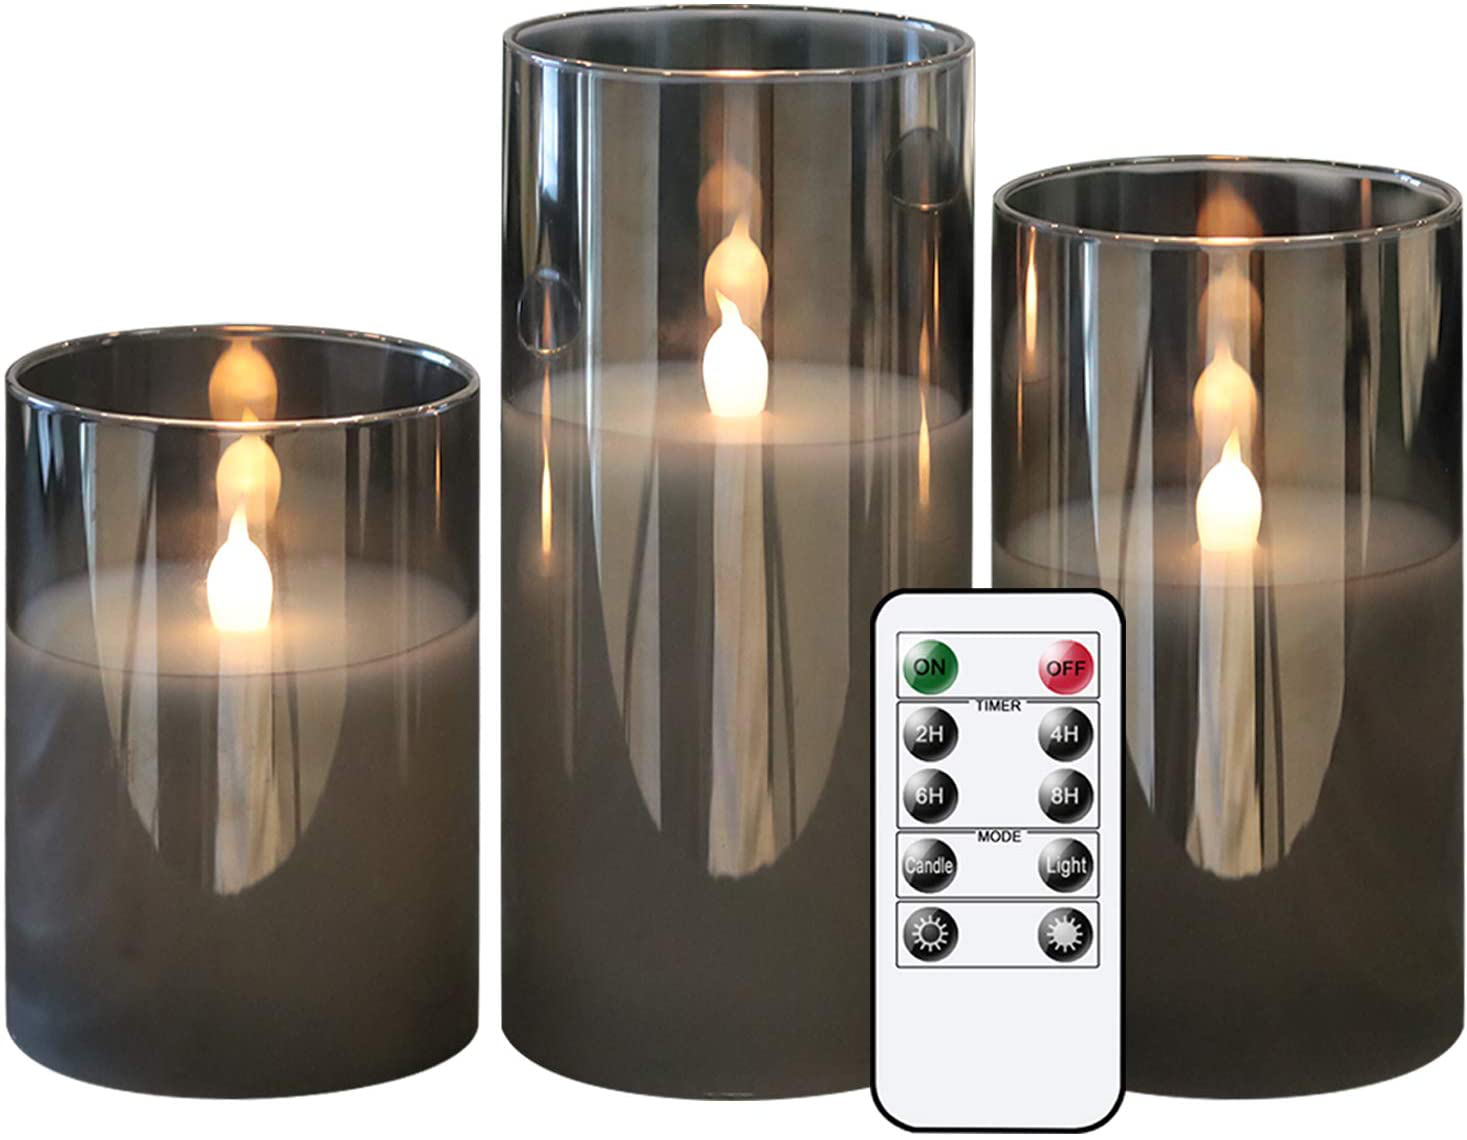 Genswin Gray Glass Battery Operated Flameless Led Candles with 10-Key Remote and Timer, Real Wax Candles Warm White Flickering Light for Home Decoration(Set of 3)